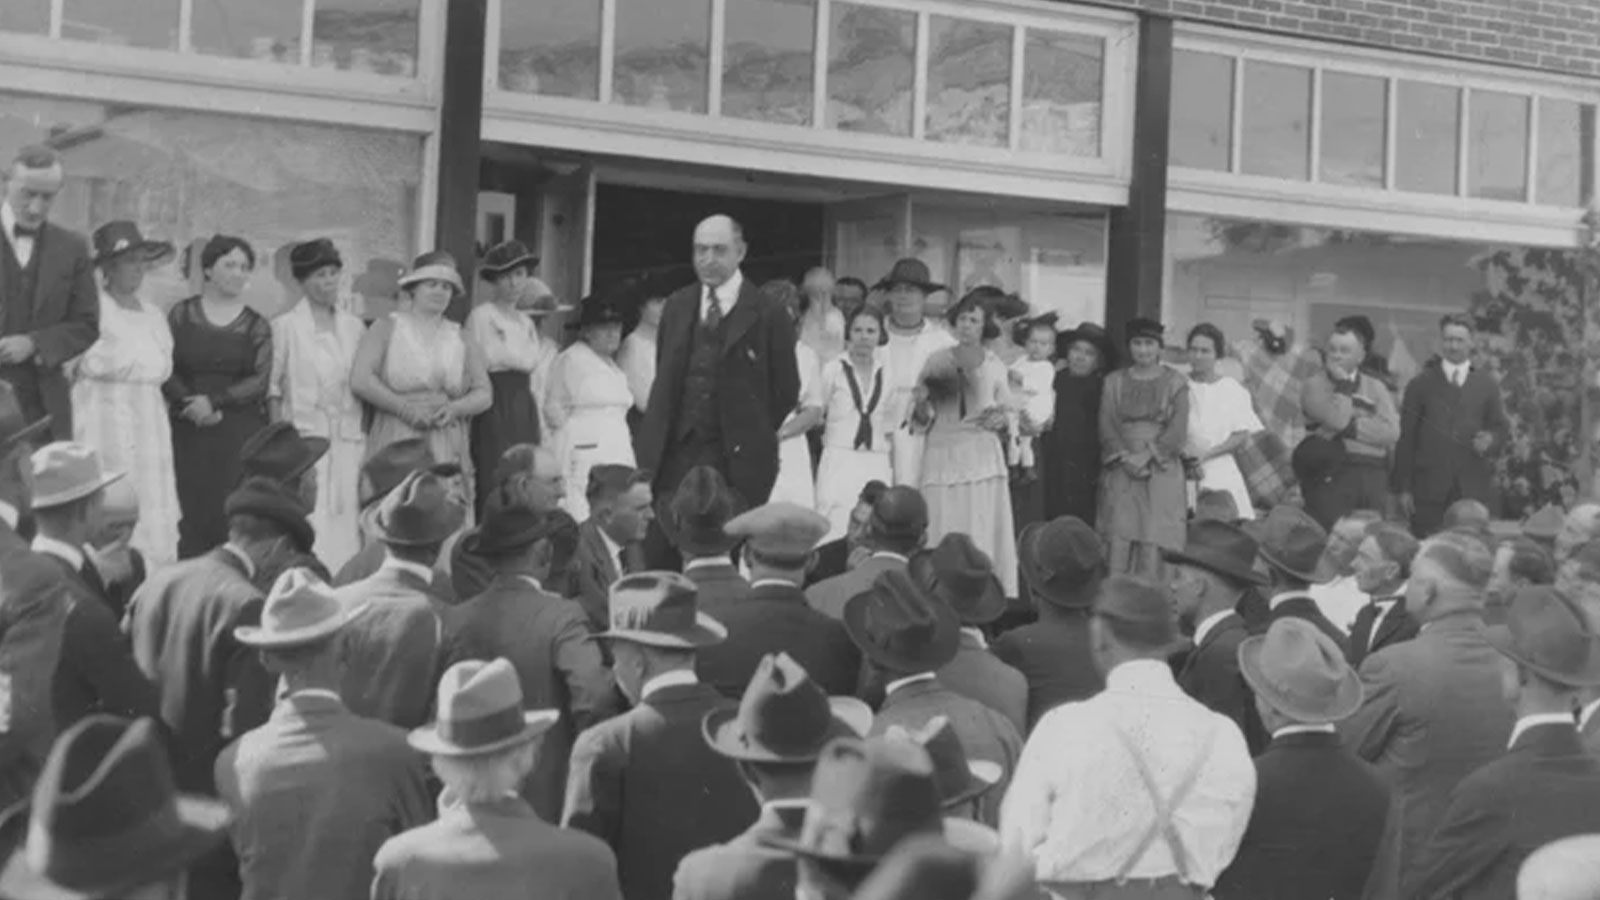 Arkansas Gov. Charles Brough addresses a crowd in front of Elaine Mercantile in Elaine, Ark., after the Elaine massacre, circa 1919.